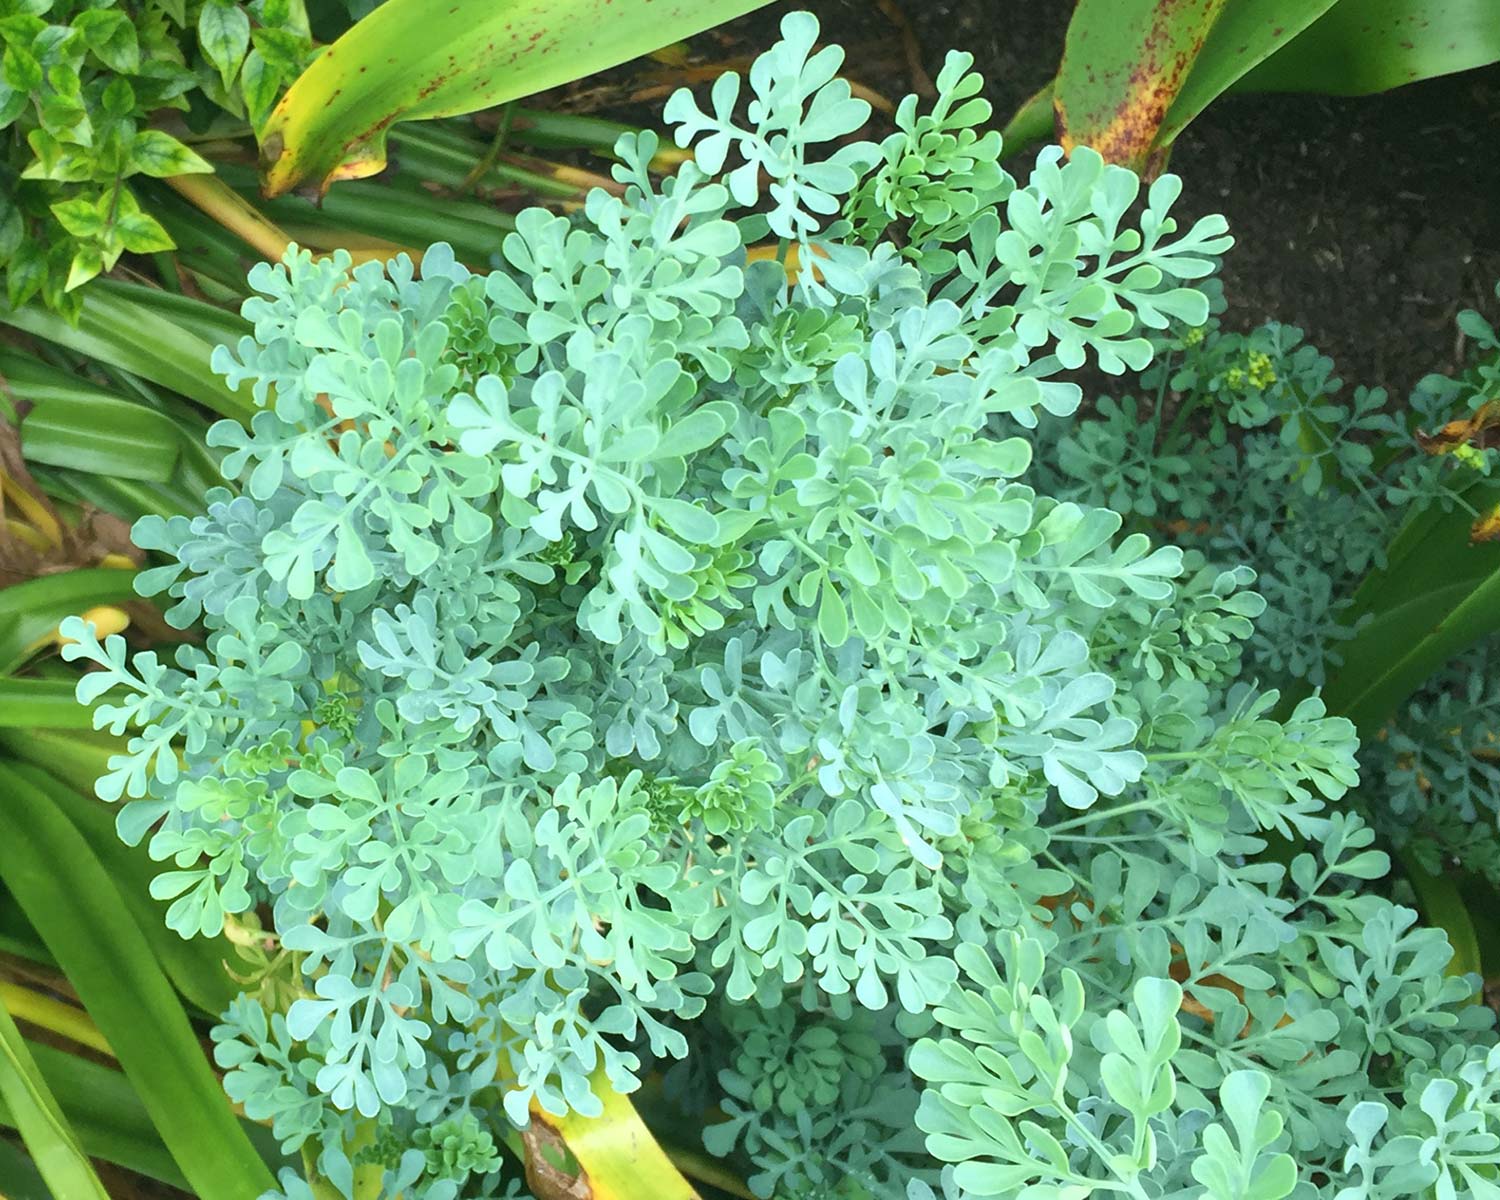 Ruta graveolens - Common Rue has pretty grey-green leaves with a lacy appearance